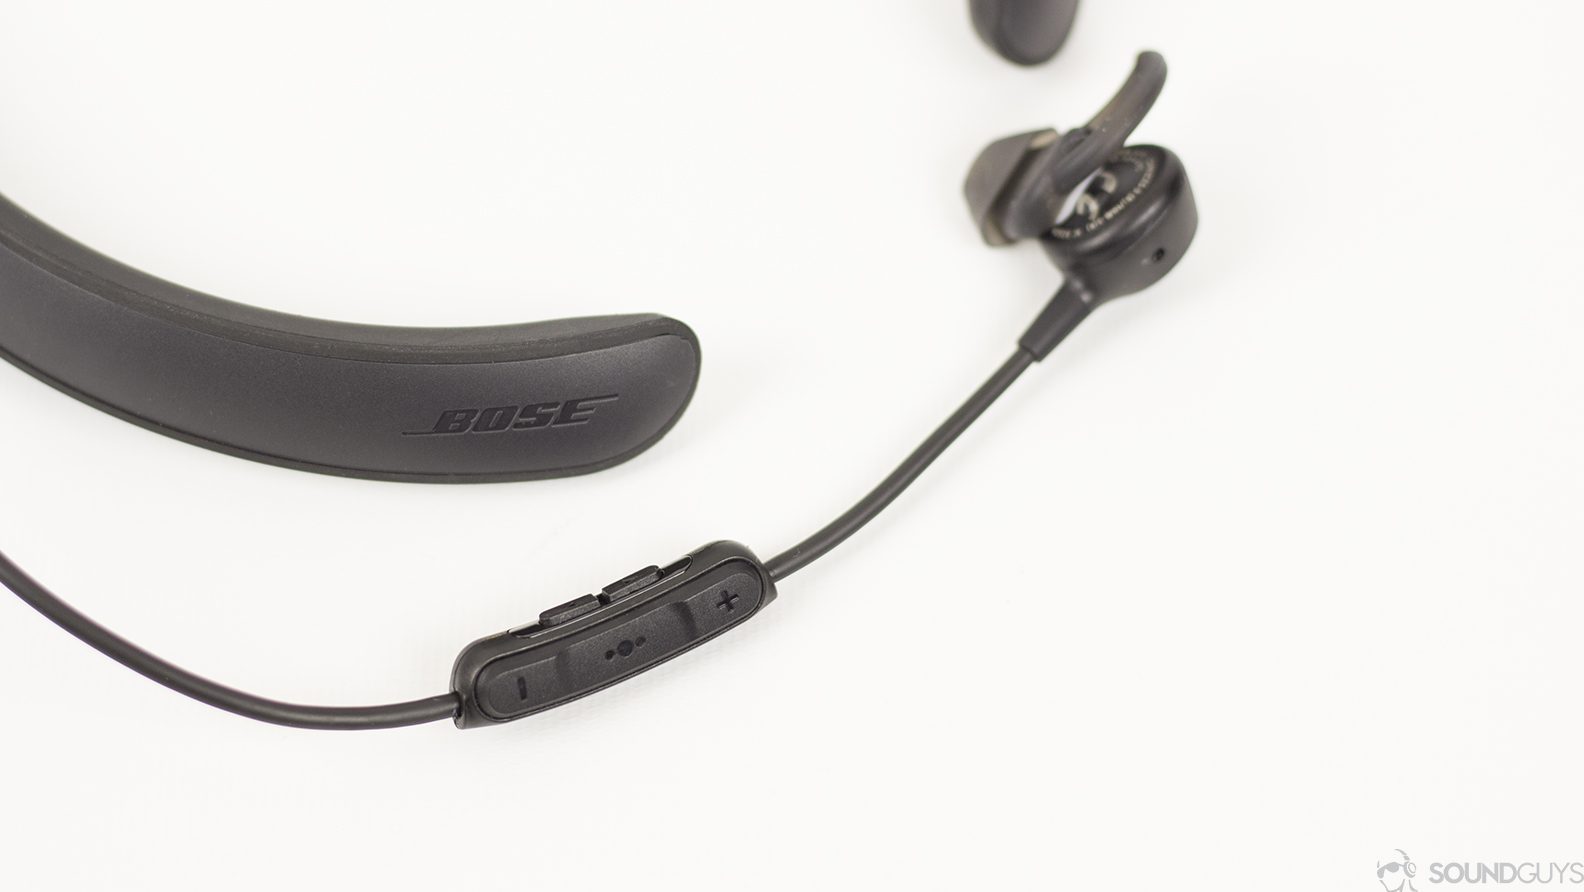 Noise canceling earbuds Bose QC 30 on white background.